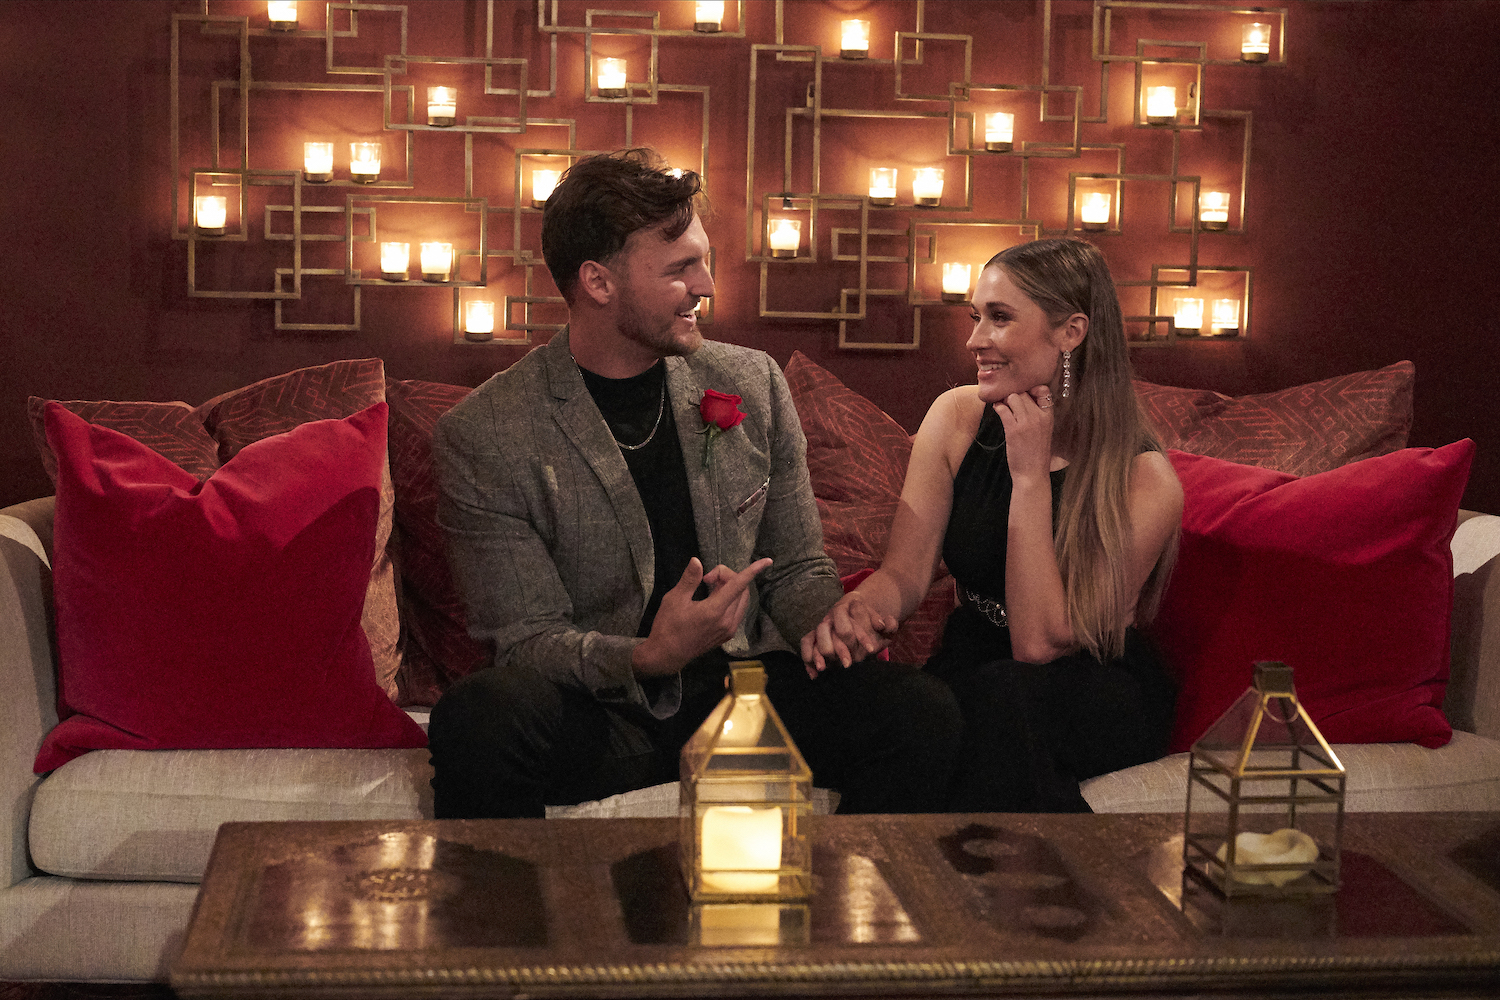 Logan Palmer and Rachel Recchia sitting on a couch together on 'The Bachelorette' Season 19